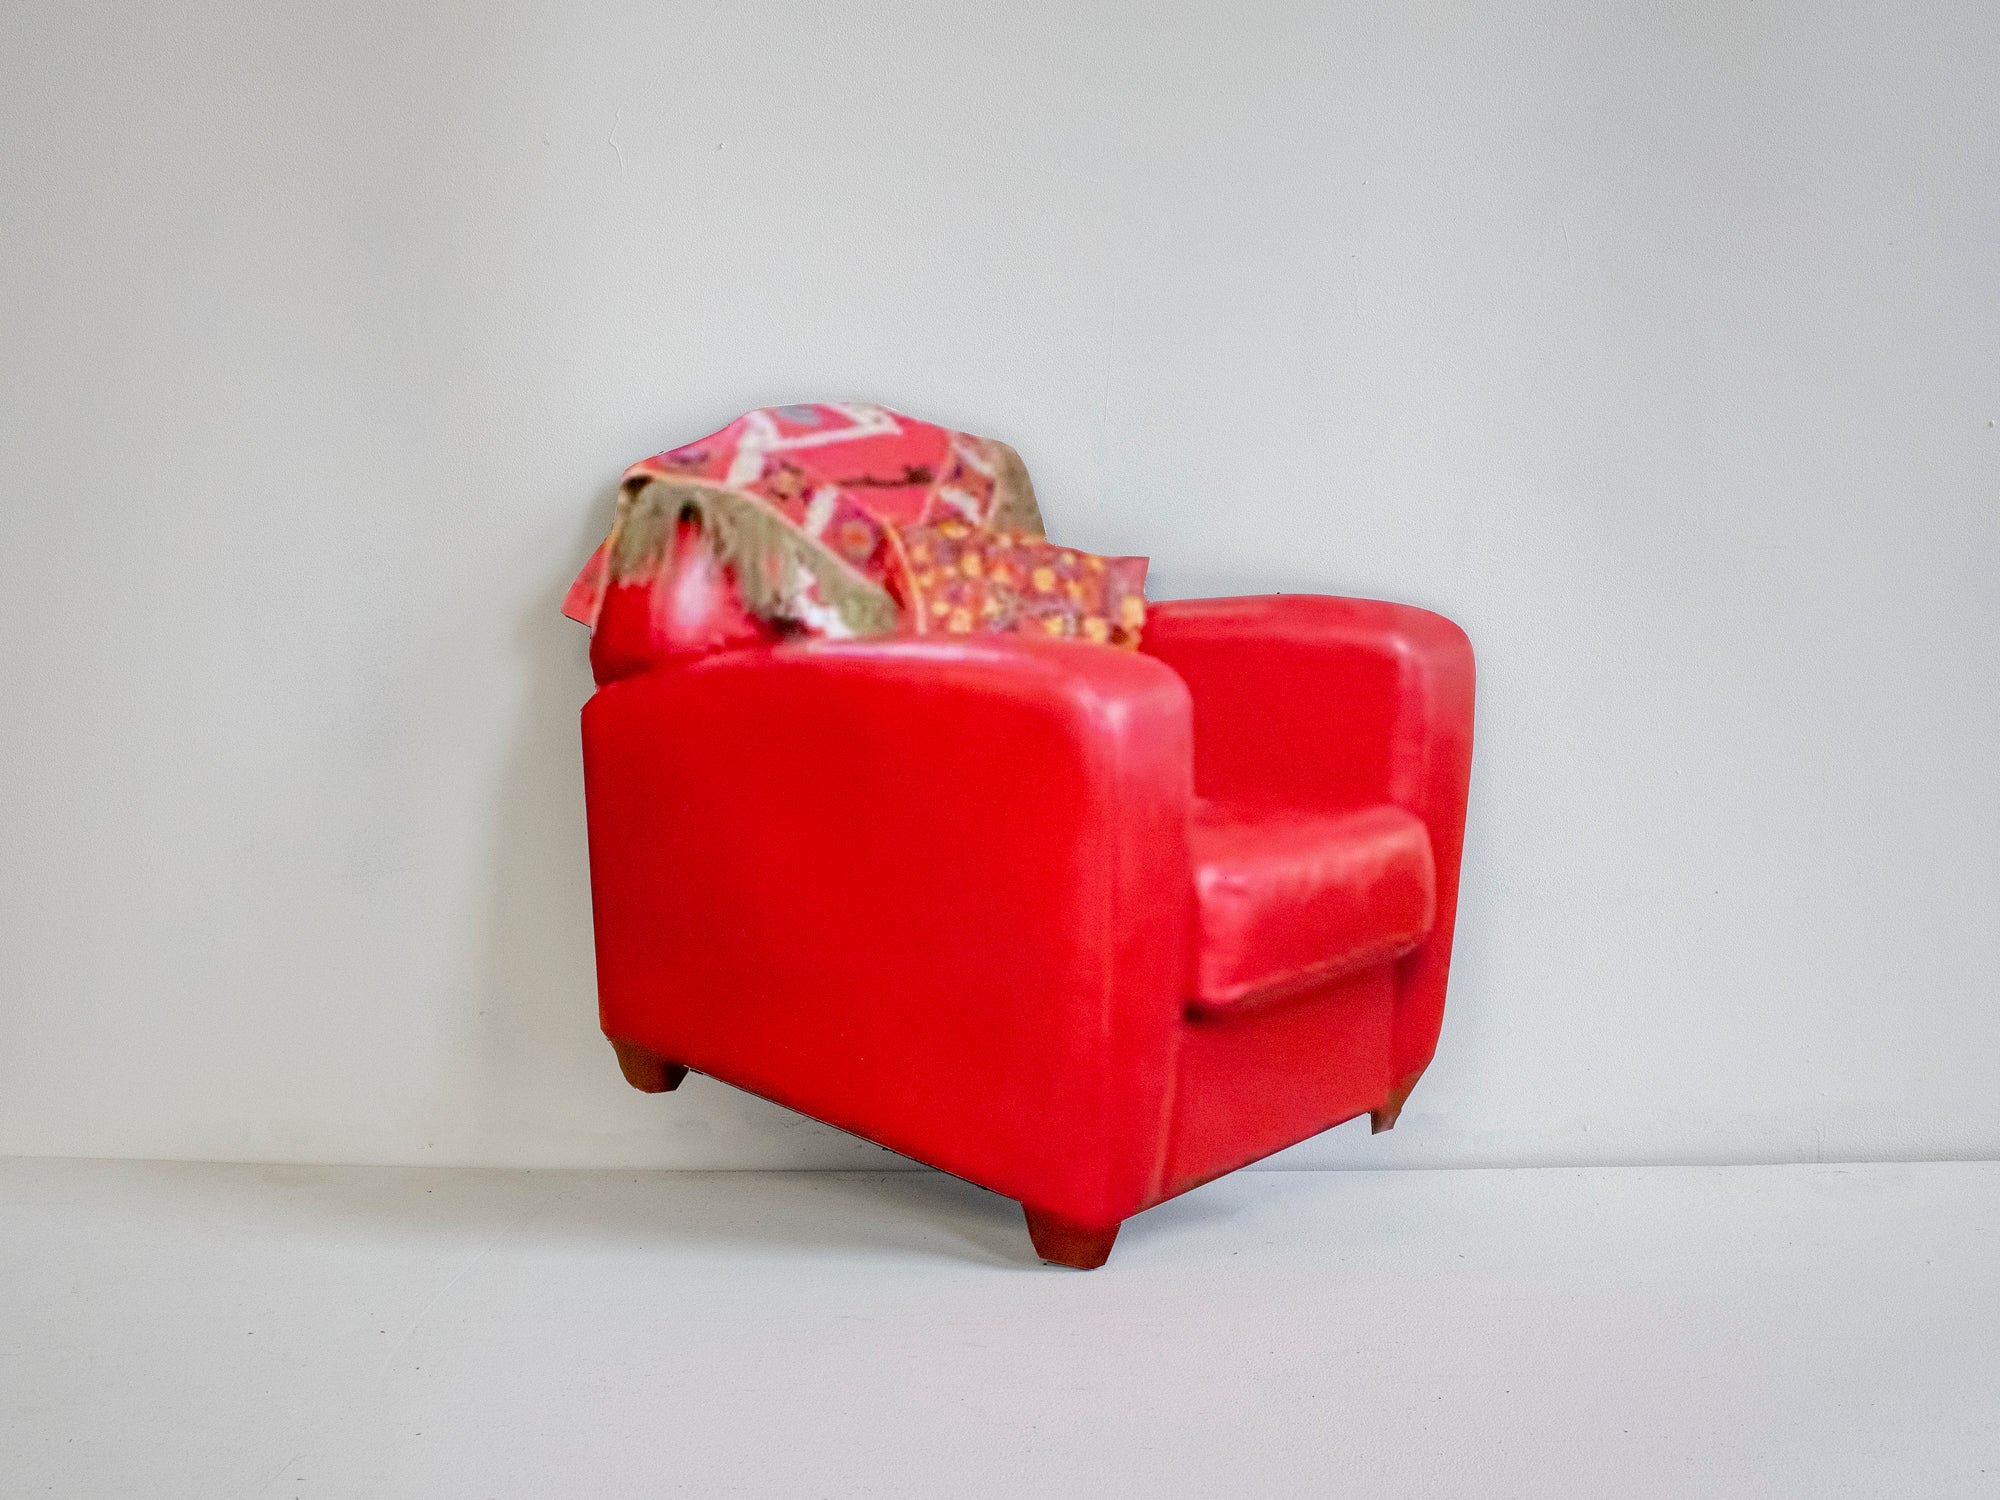 Unhee Park, "Red Bonded Leather Tub Club #02"